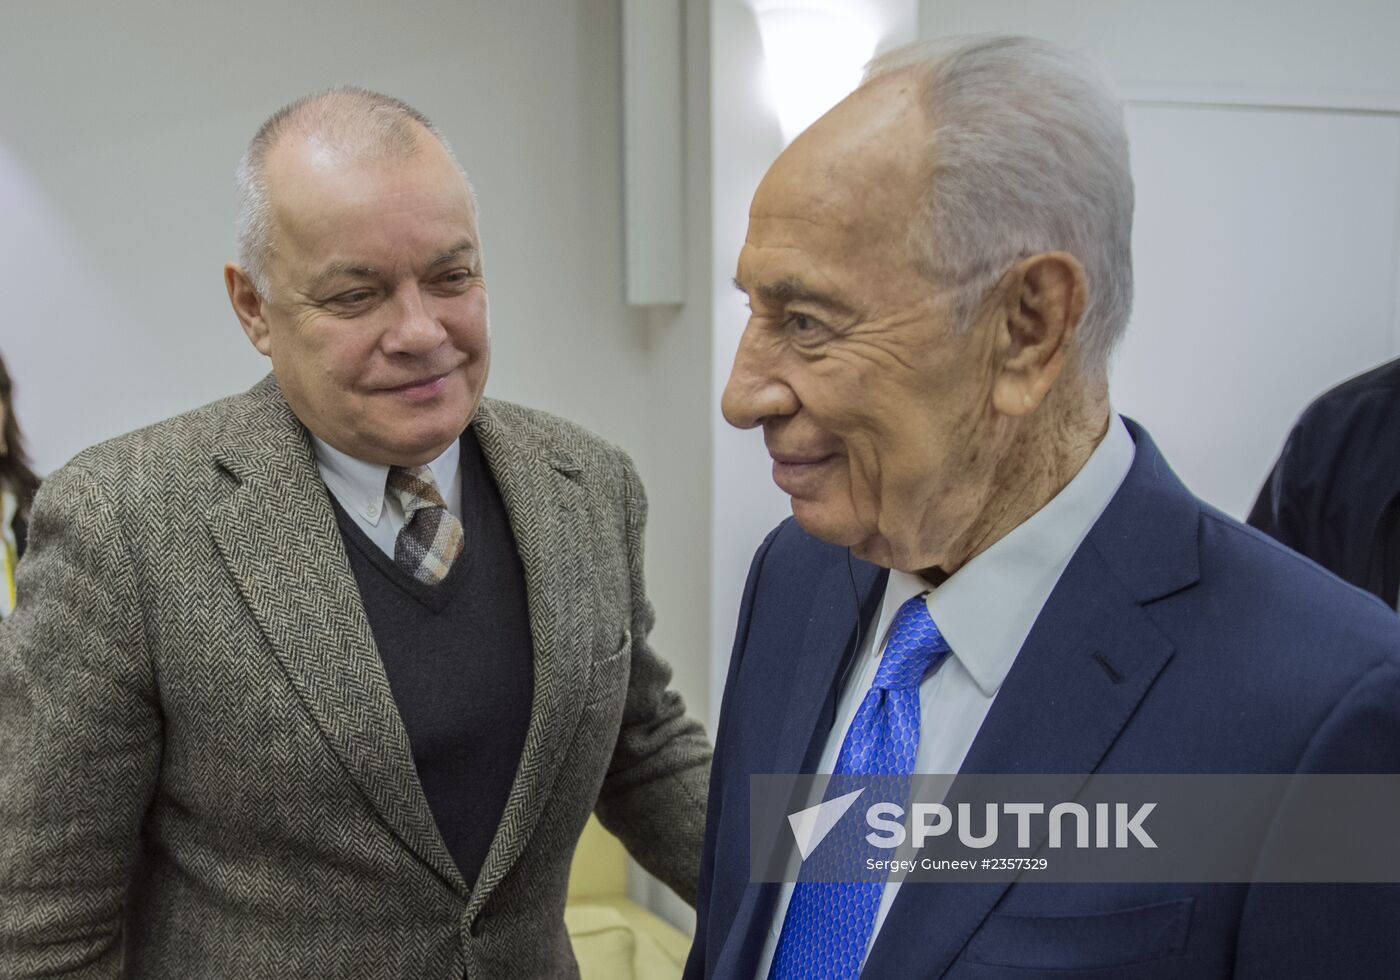 Shimon Peres meets with members of Editors' Club